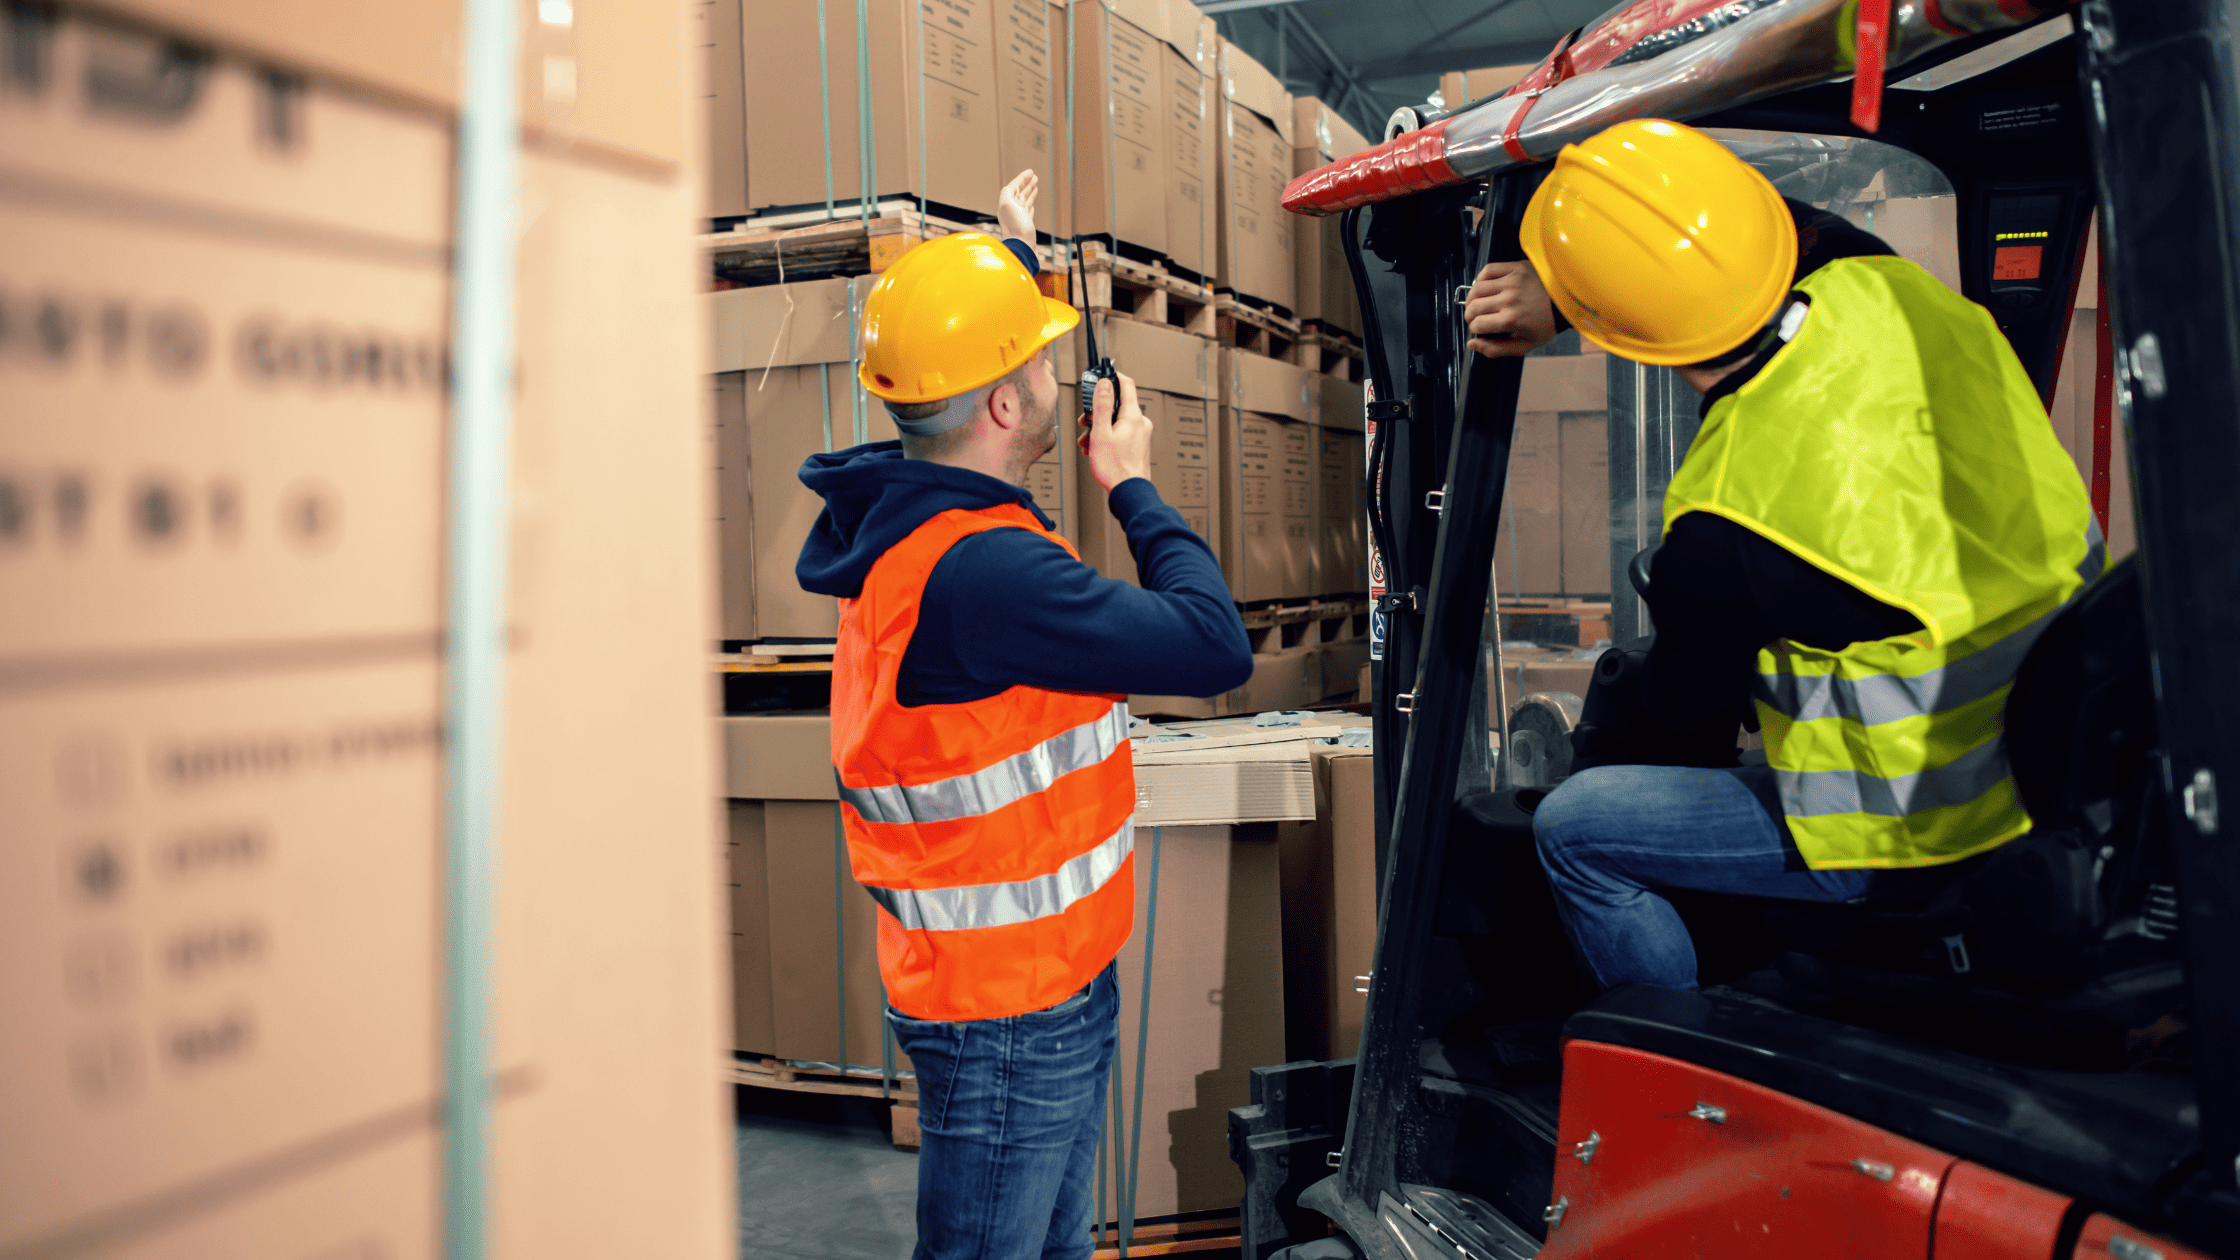 Forklift operator and pedestrian discussing box load